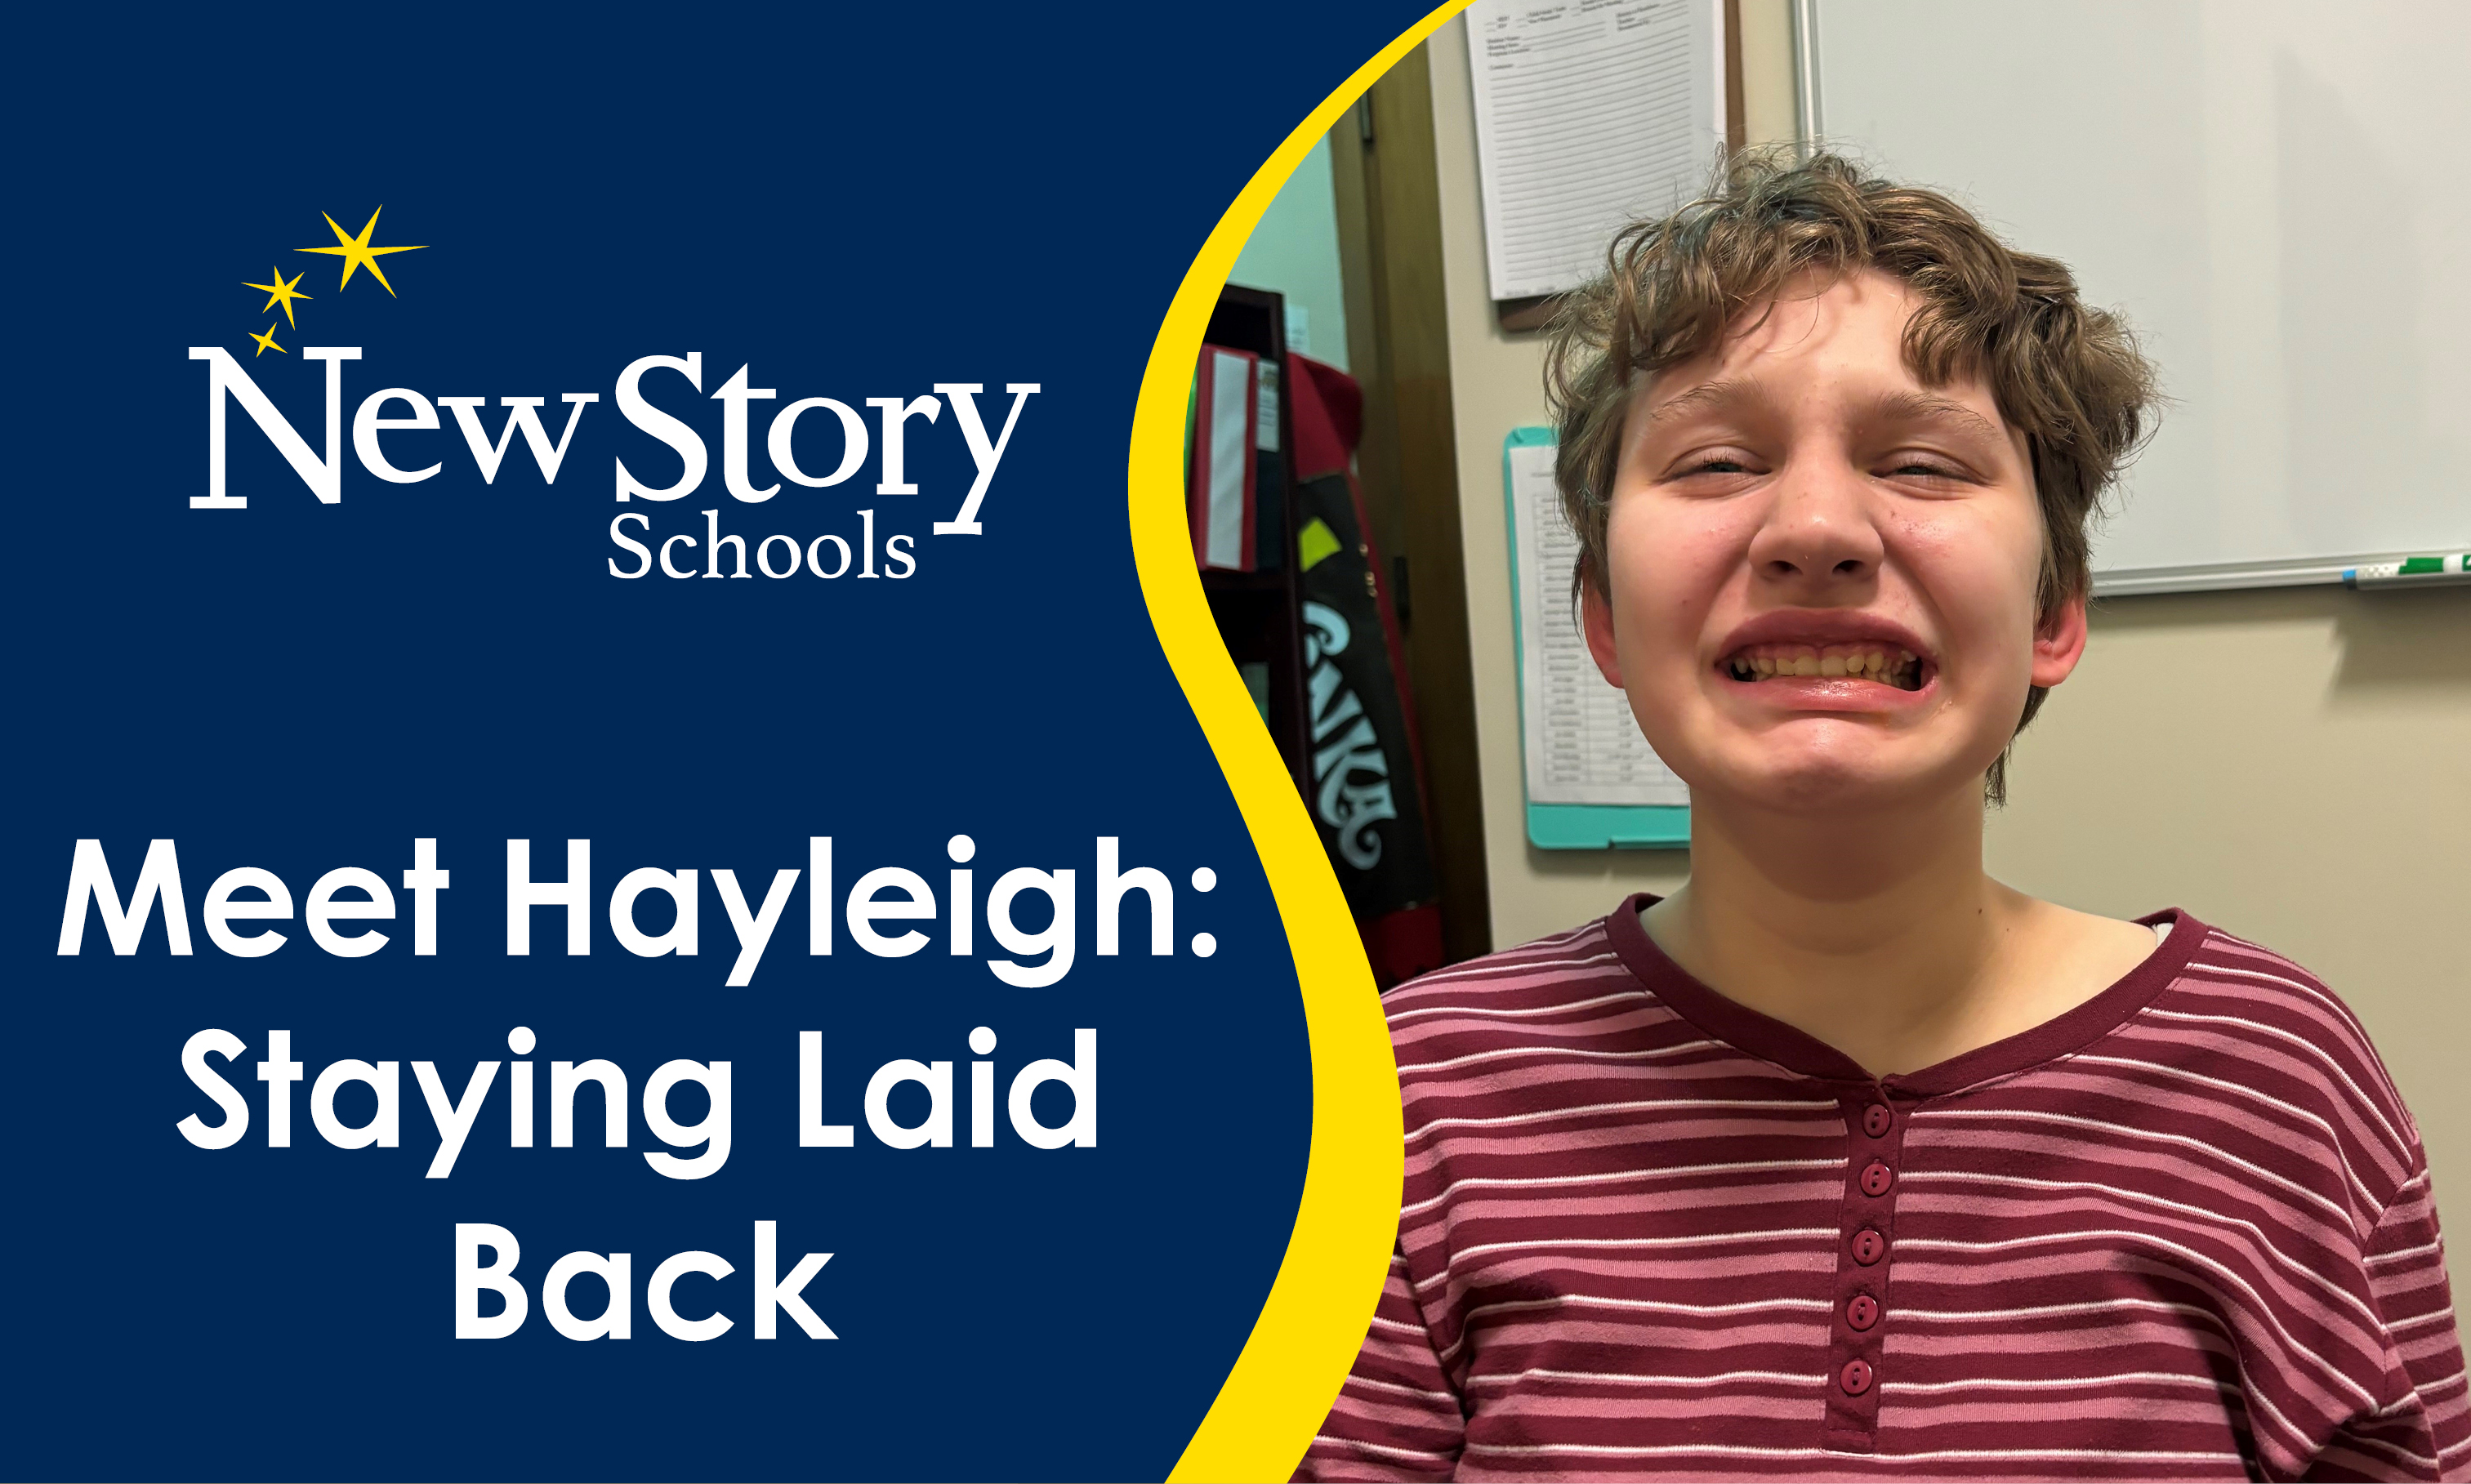 Meet Hayleigh: Staying Laid Back